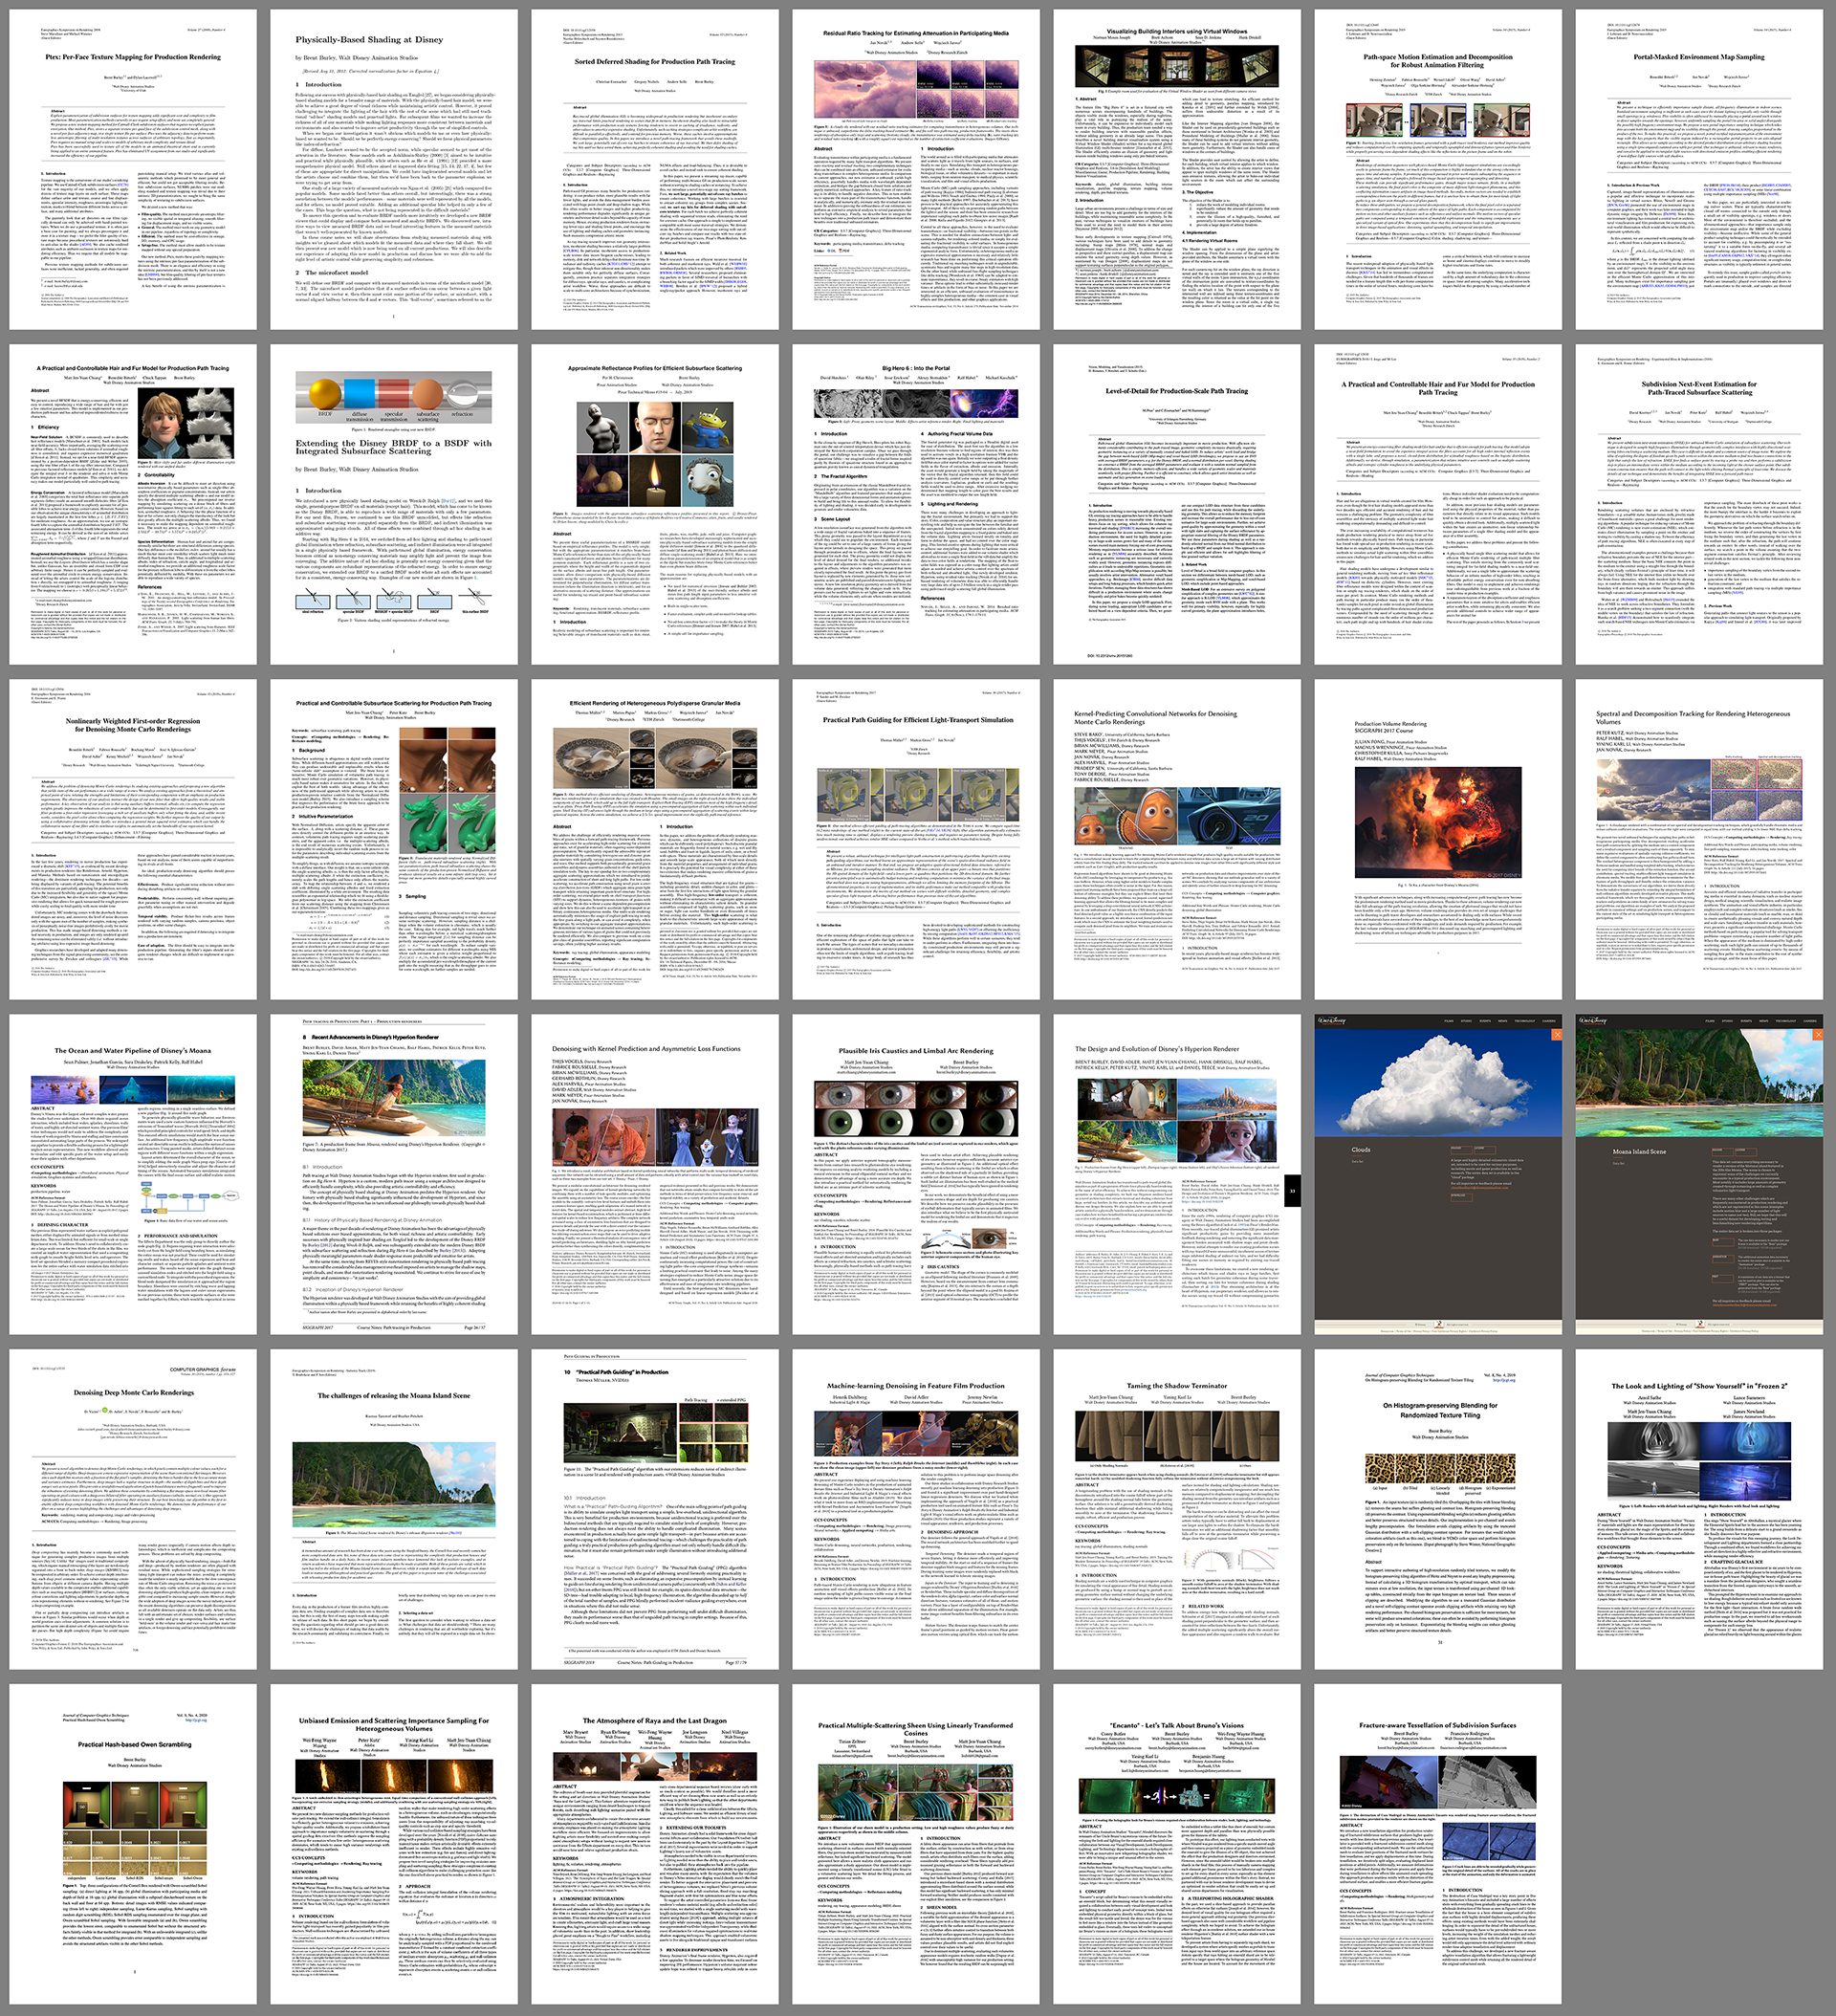 Figure 1: Previews of the first page of every Hyperion-related publication from Disney Animation, Disney Research Studios, and other research partners.